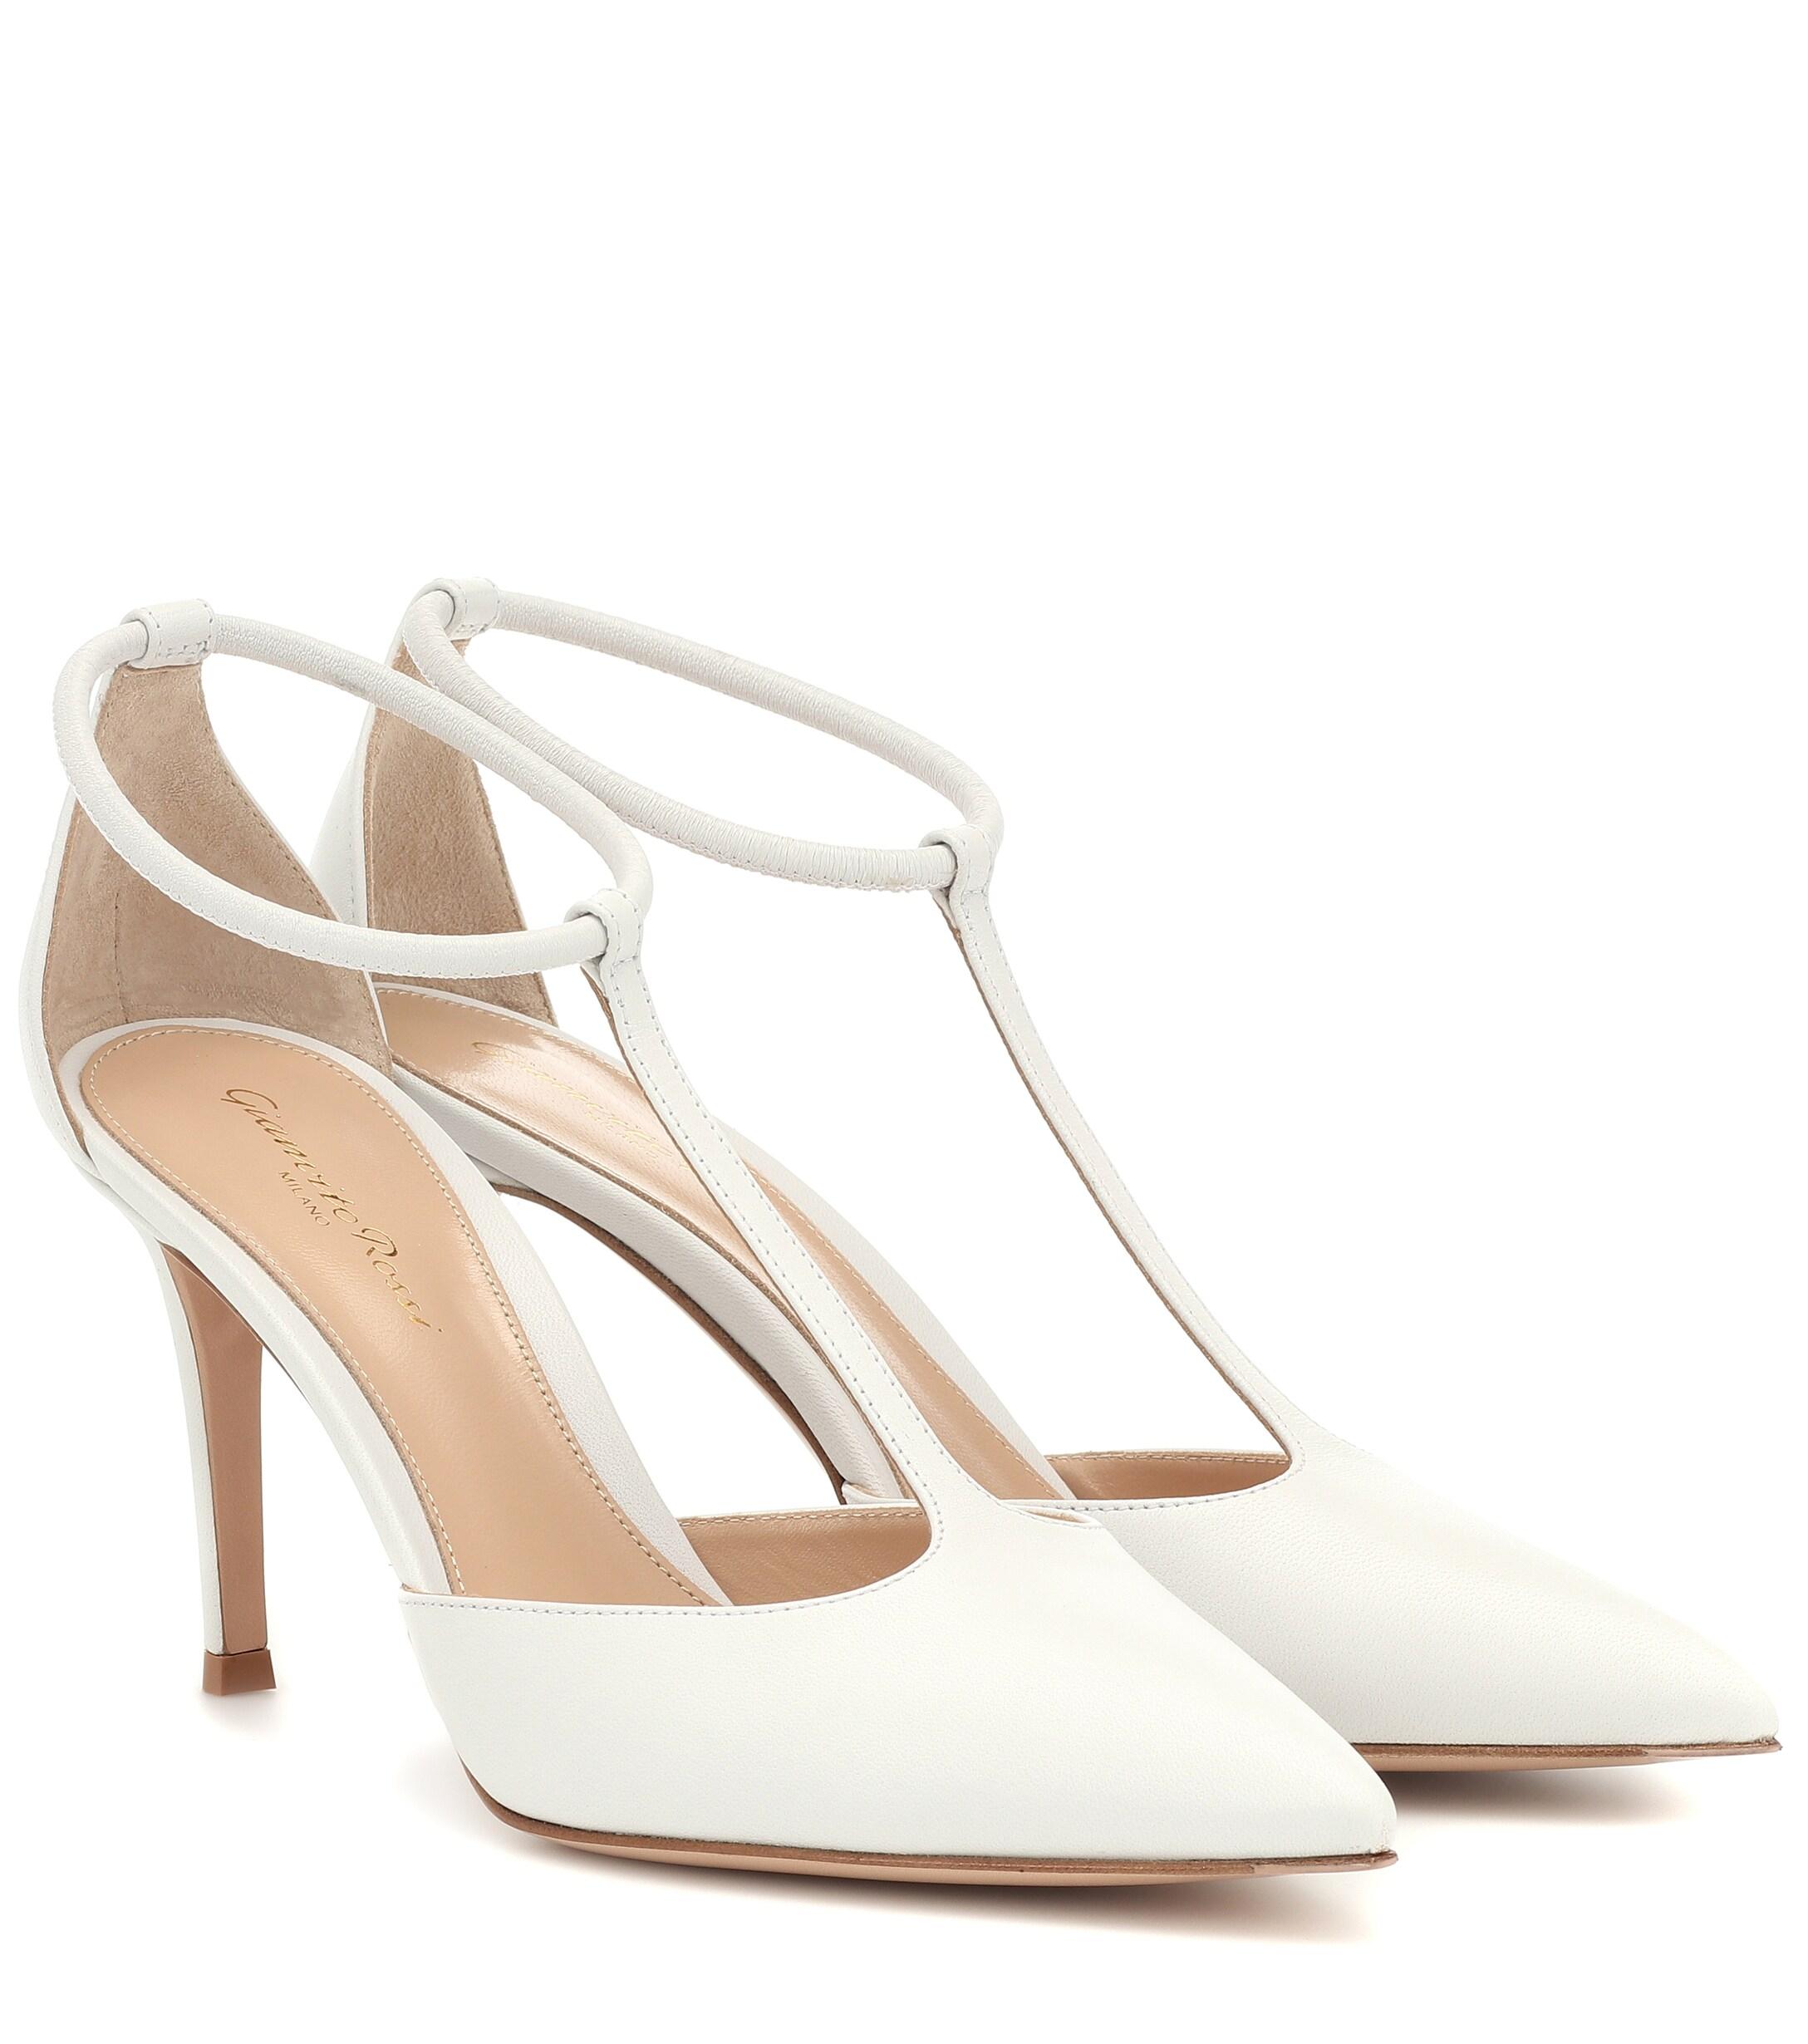 Gianvito Rossi Cheryl 85 Leather Pumps in White - Lyst